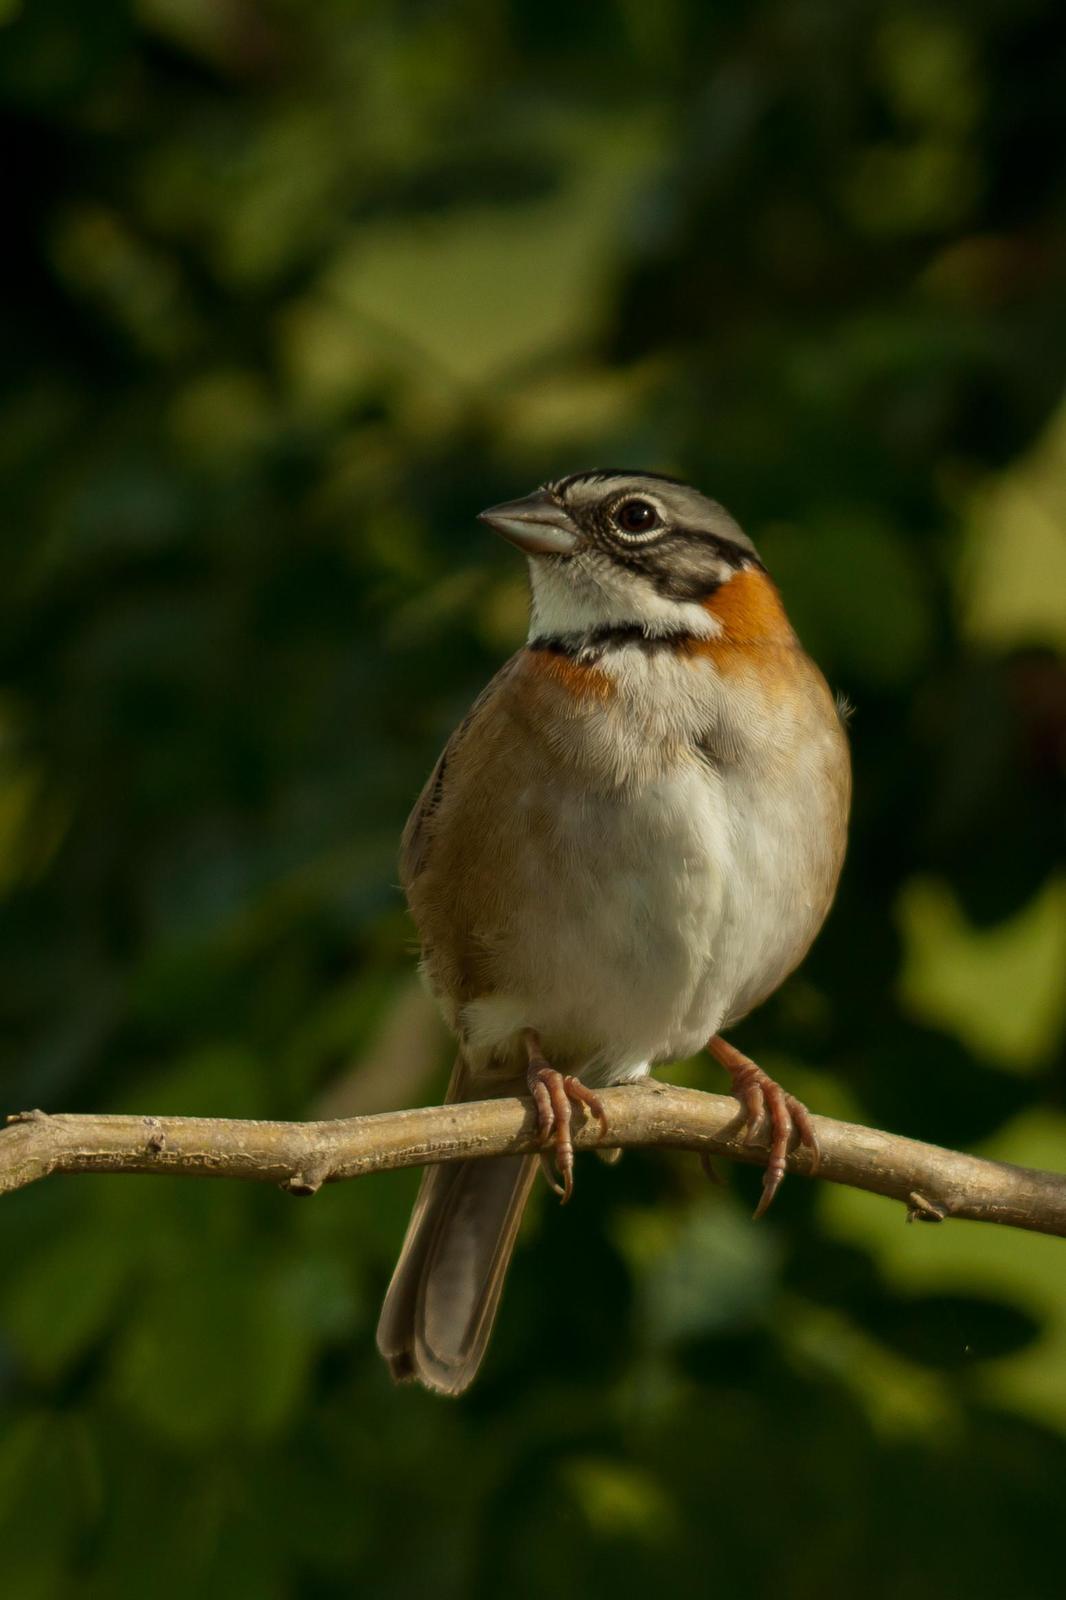 Rufous-collared Sparrow Photo by Darren Bellerby